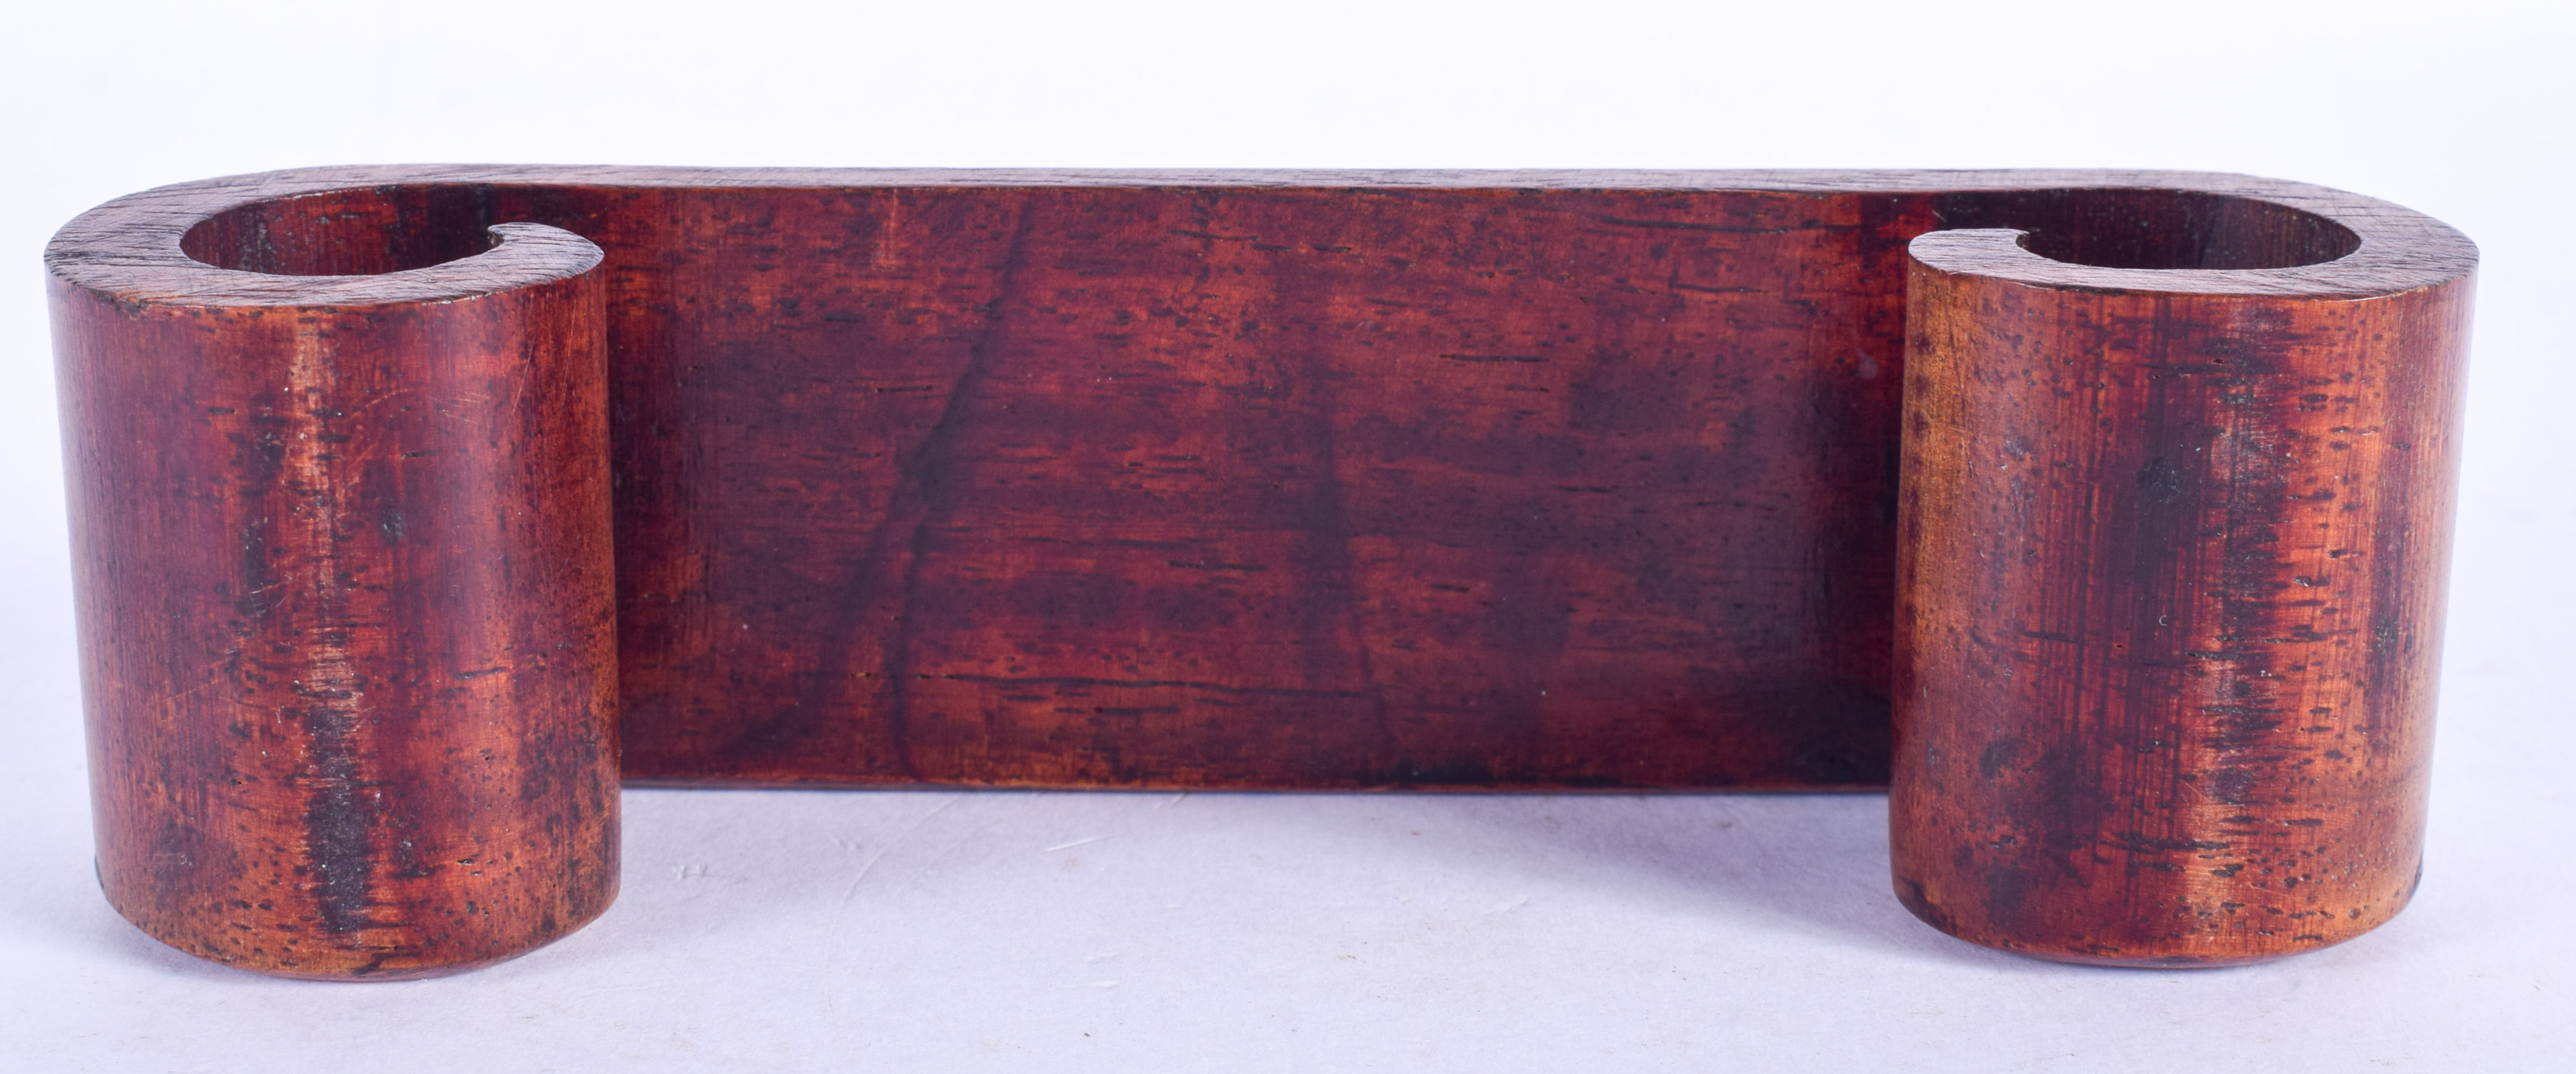 AN EARLY 20TH CENTURY CHINESE CARVED HARDWOOD SCROLLING STAND. 12 cm wide. - Image 3 of 3